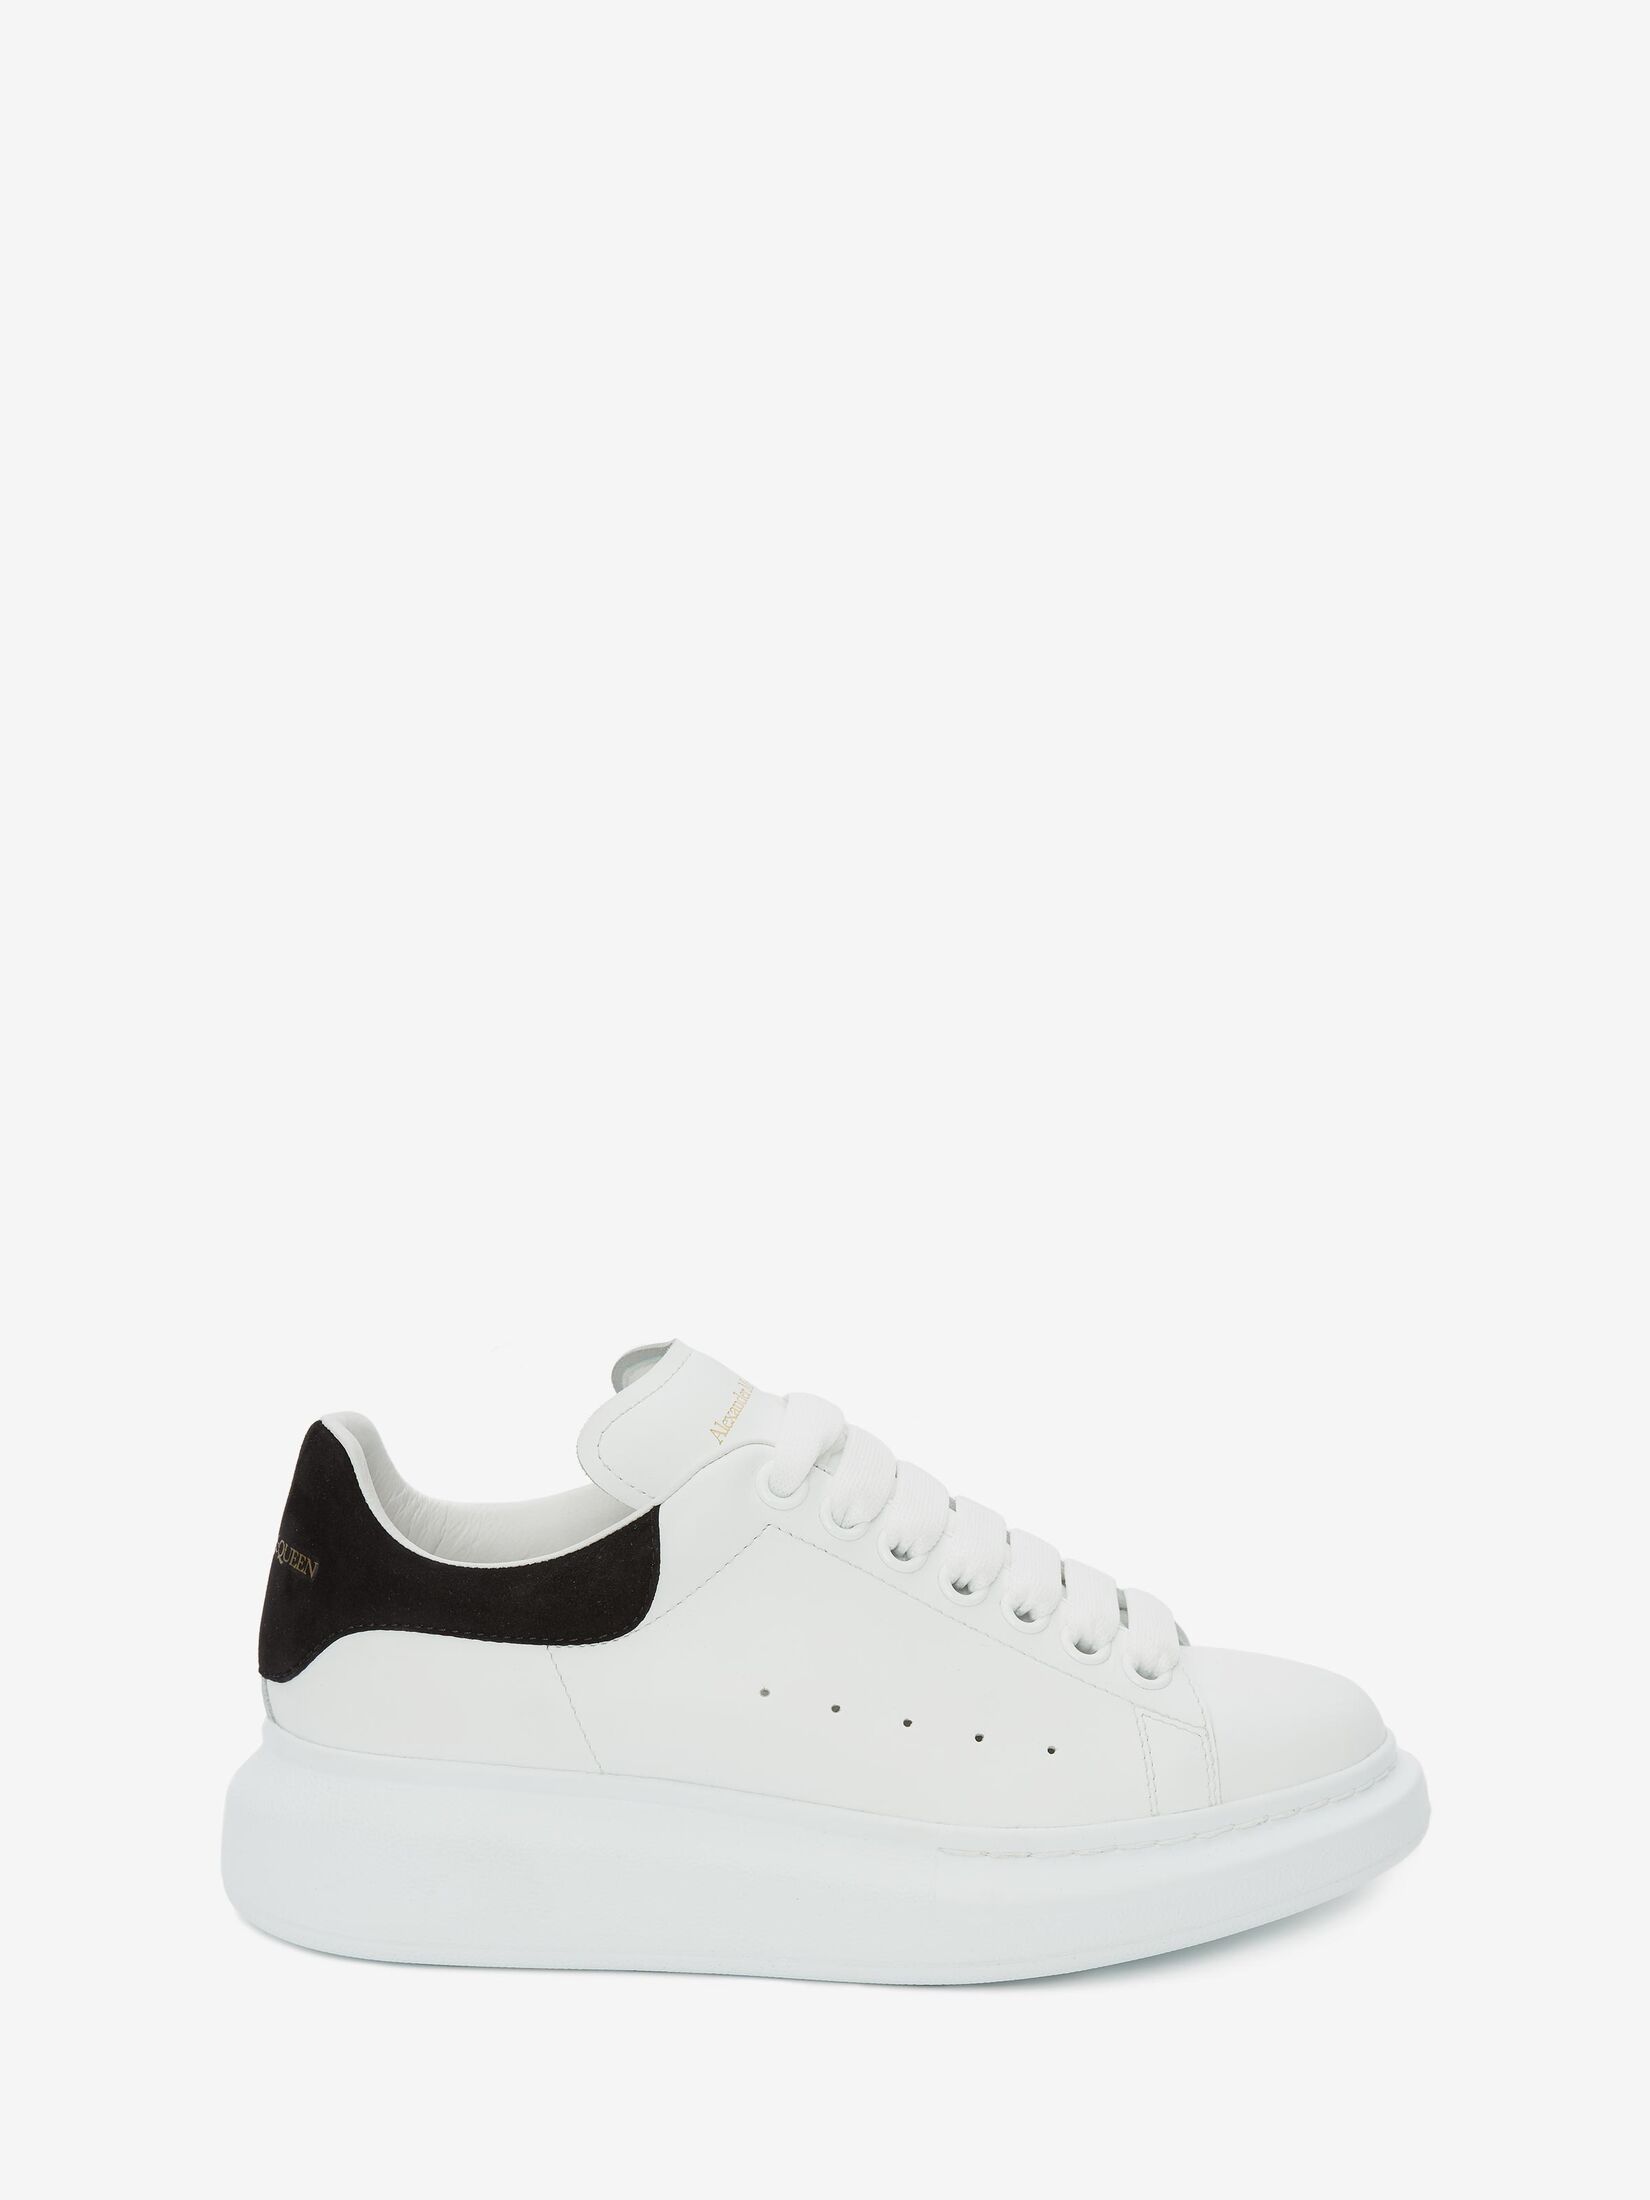 Alexander Mcqueen Oversize sneakers with reflective inserts